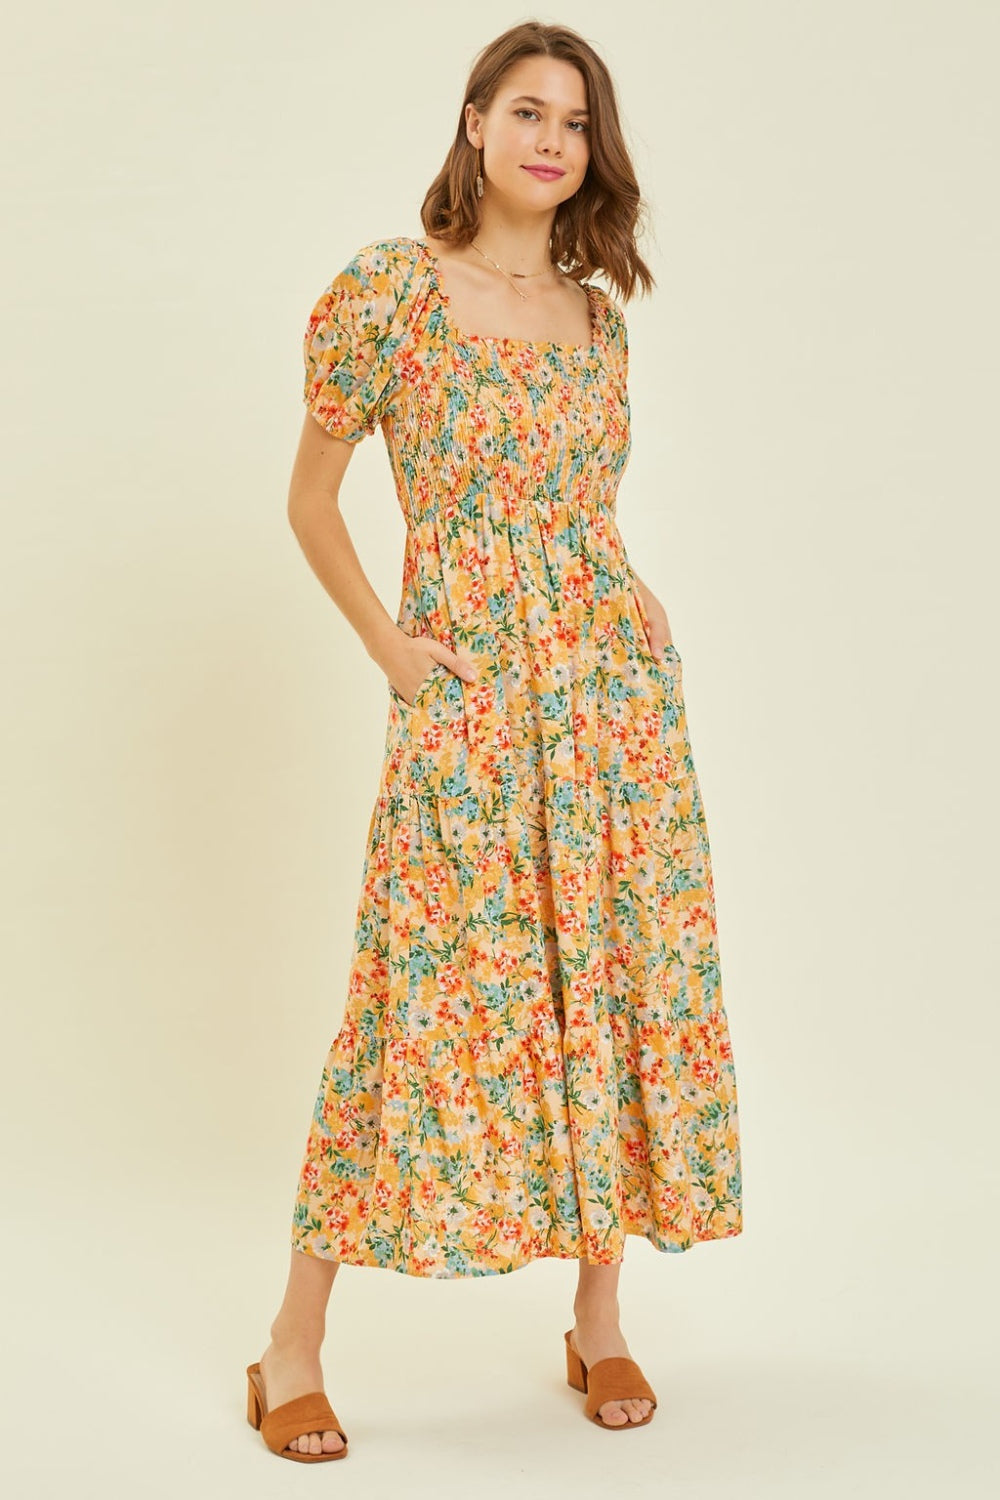 Wheat HEYSON Full Size Floral Smocked Tiered Midi Dress Sentient Beauty Fashions Apaparel & Accessories